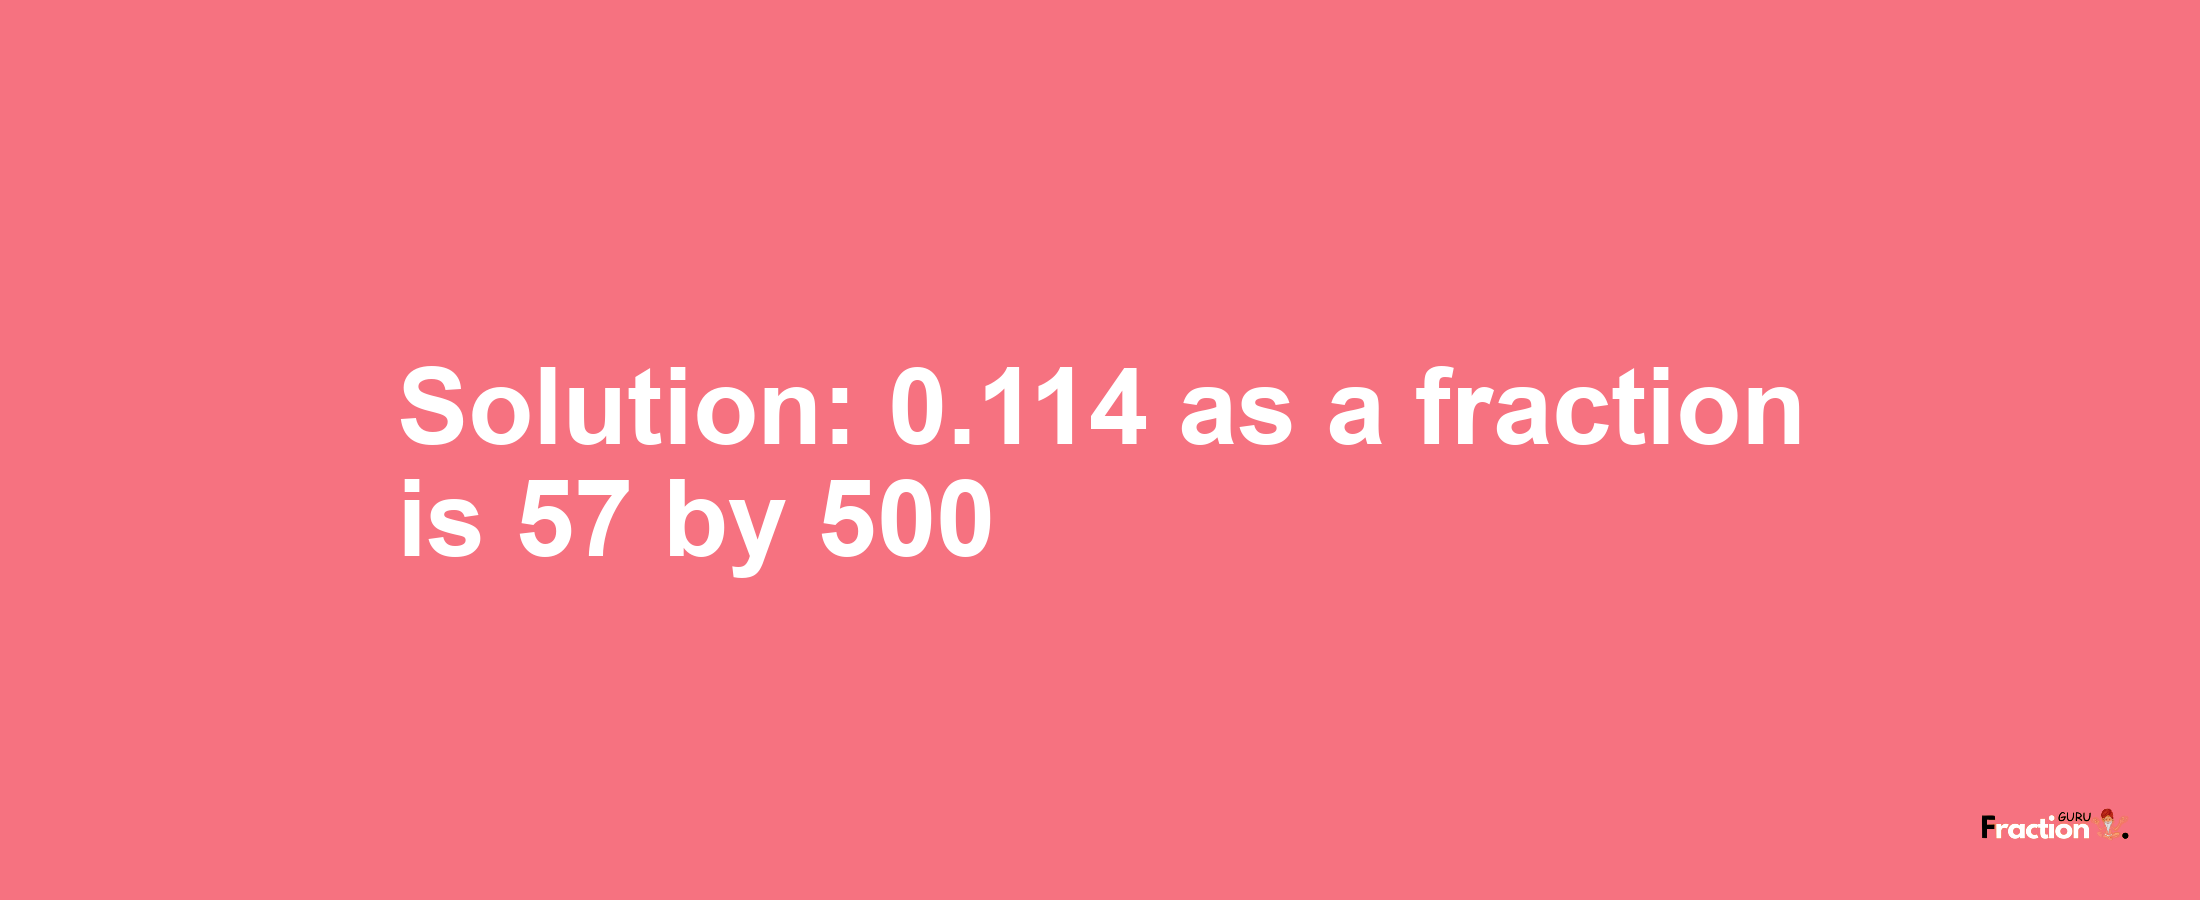 Solution:0.114 as a fraction is 57/500